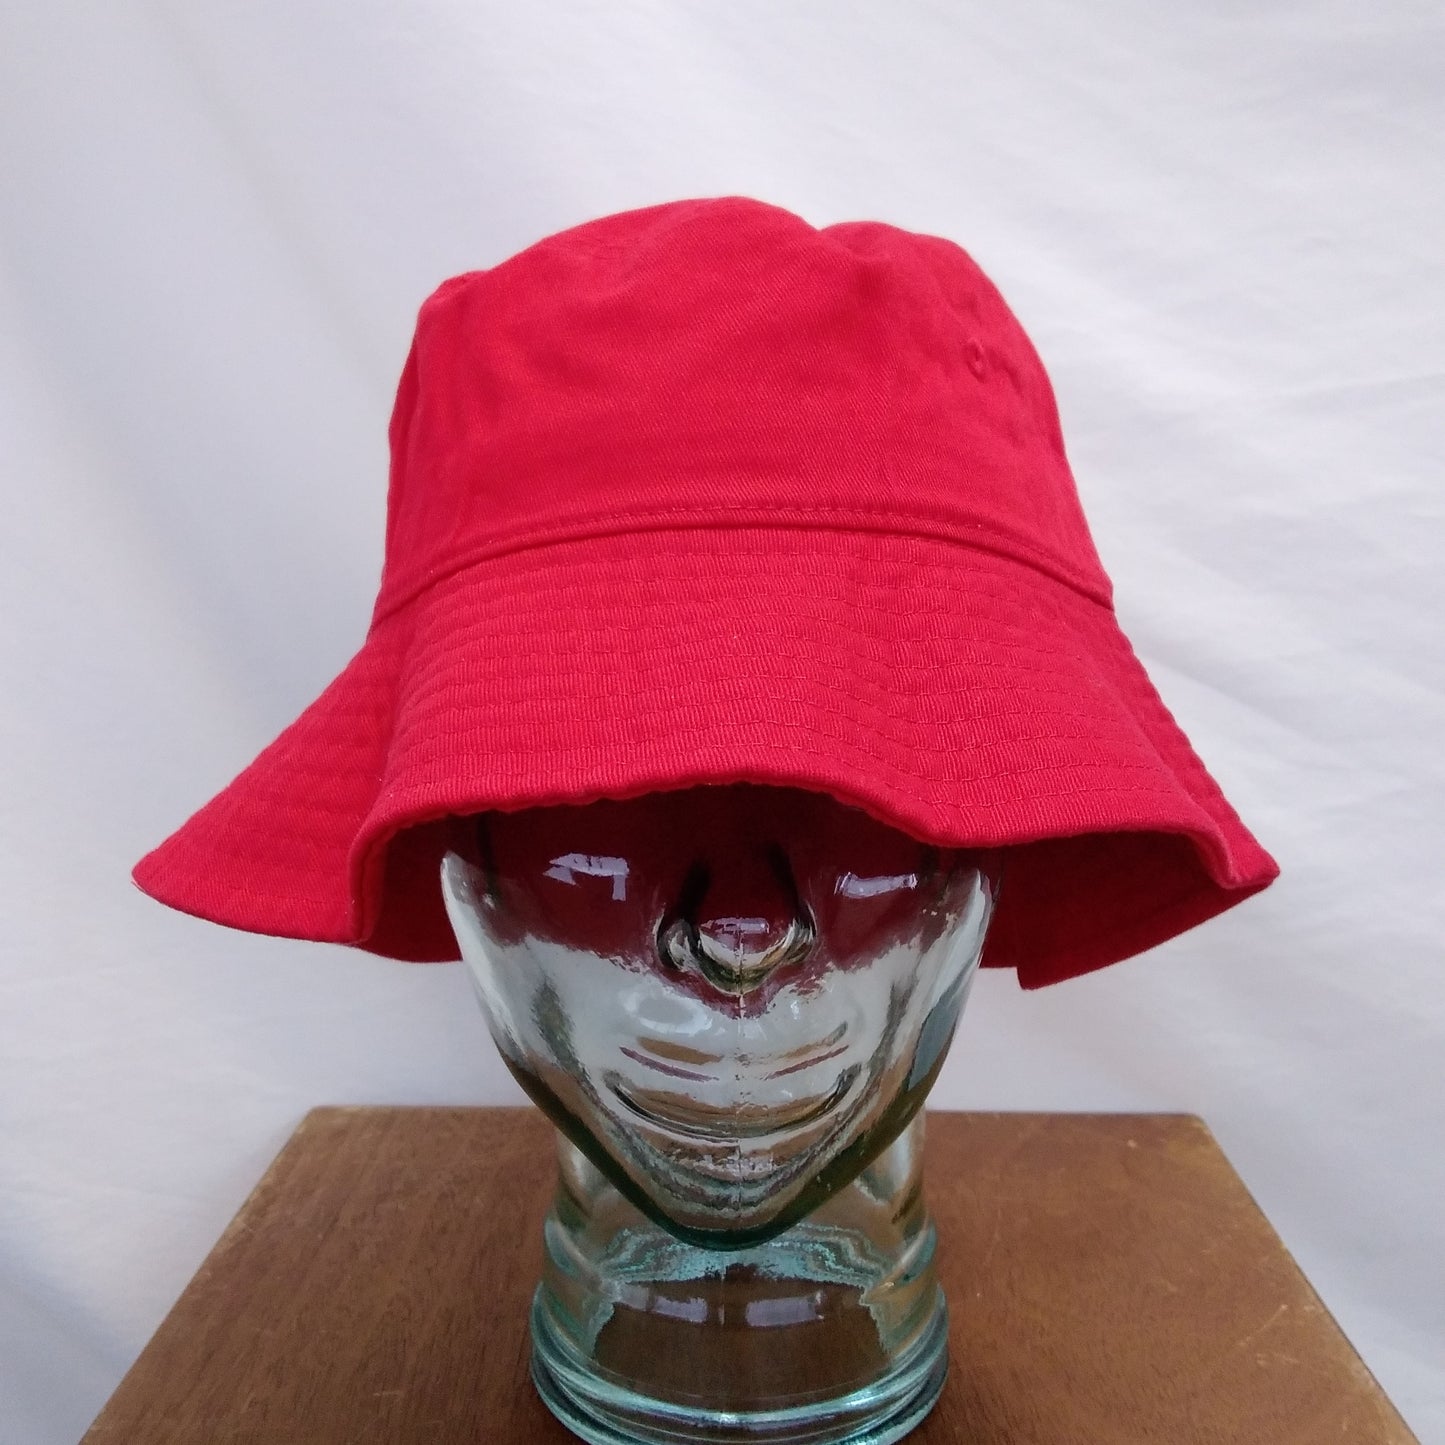 NWT - The Hat Depot Newhattan Long Brim 100% Cotton Red Fashion Bucket Hat - Size: S/M